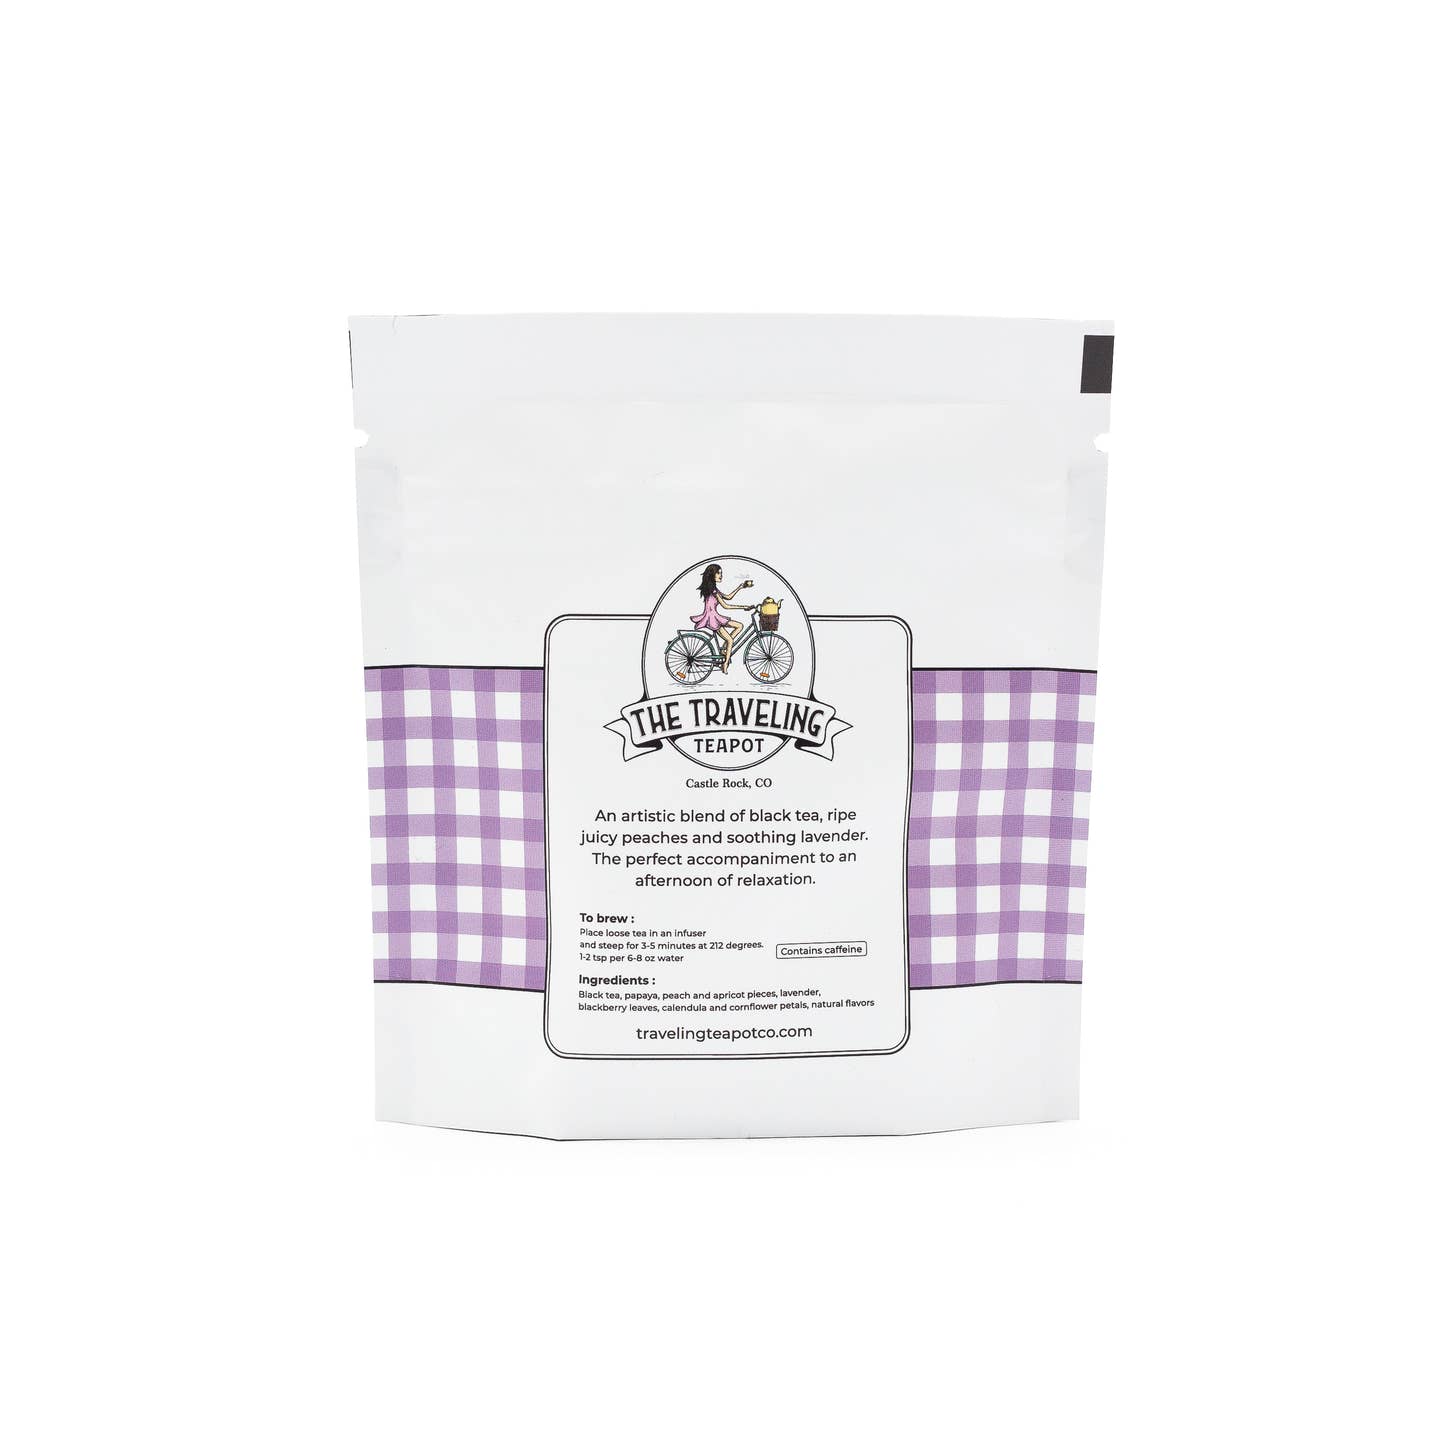 Back of Lavender Peach black tea blend by The Traveling Teapot white and purple gingham printed loose leaf tea pouch with a woman on a bicycle illustration, tea description, ingredients, and steeping instructions